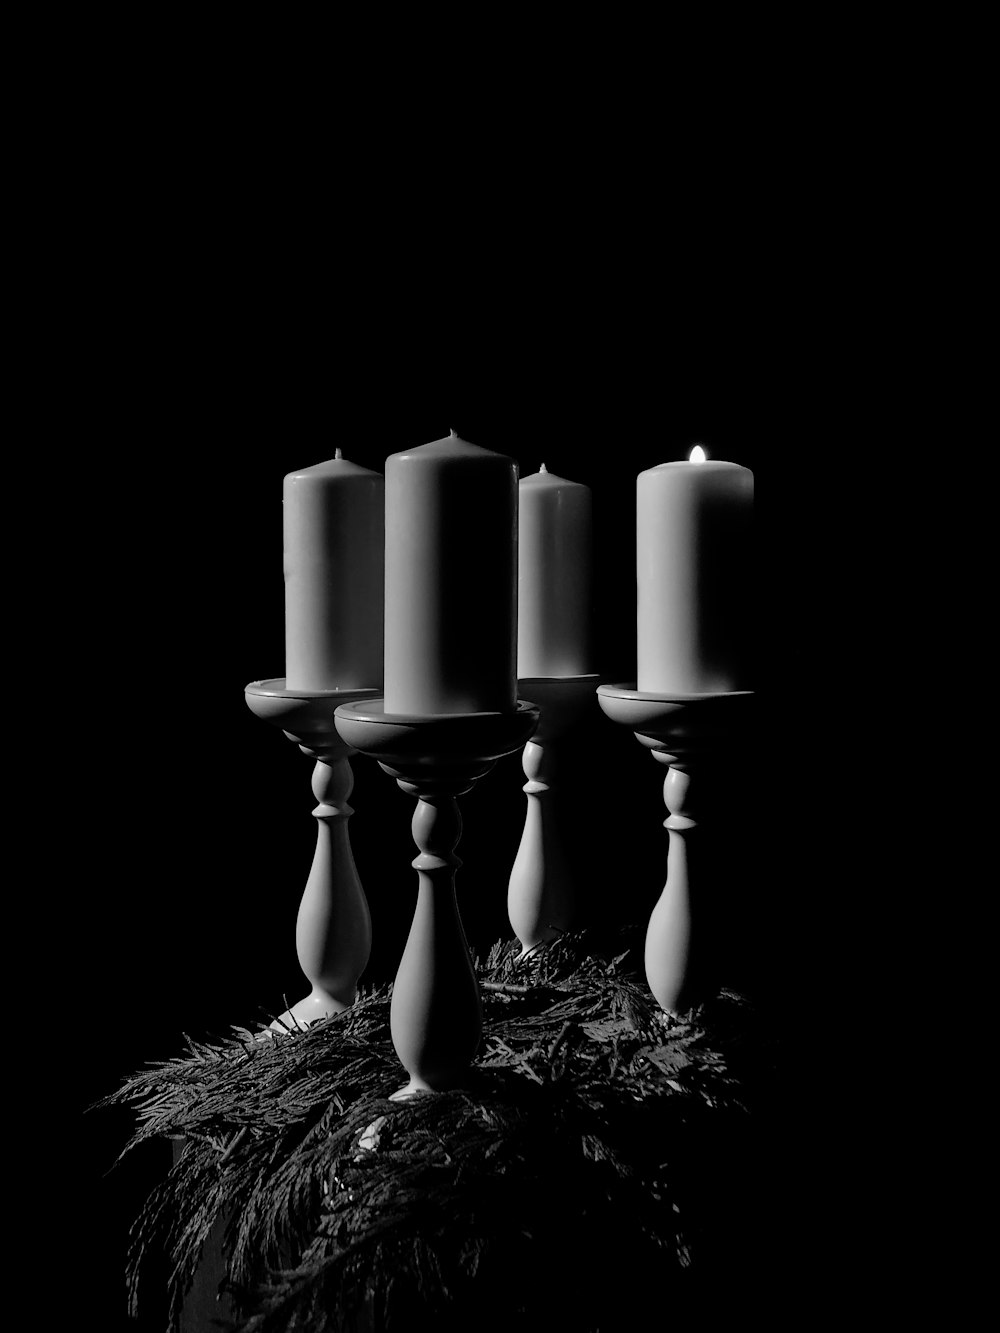 grayscale photography of unlighted candle